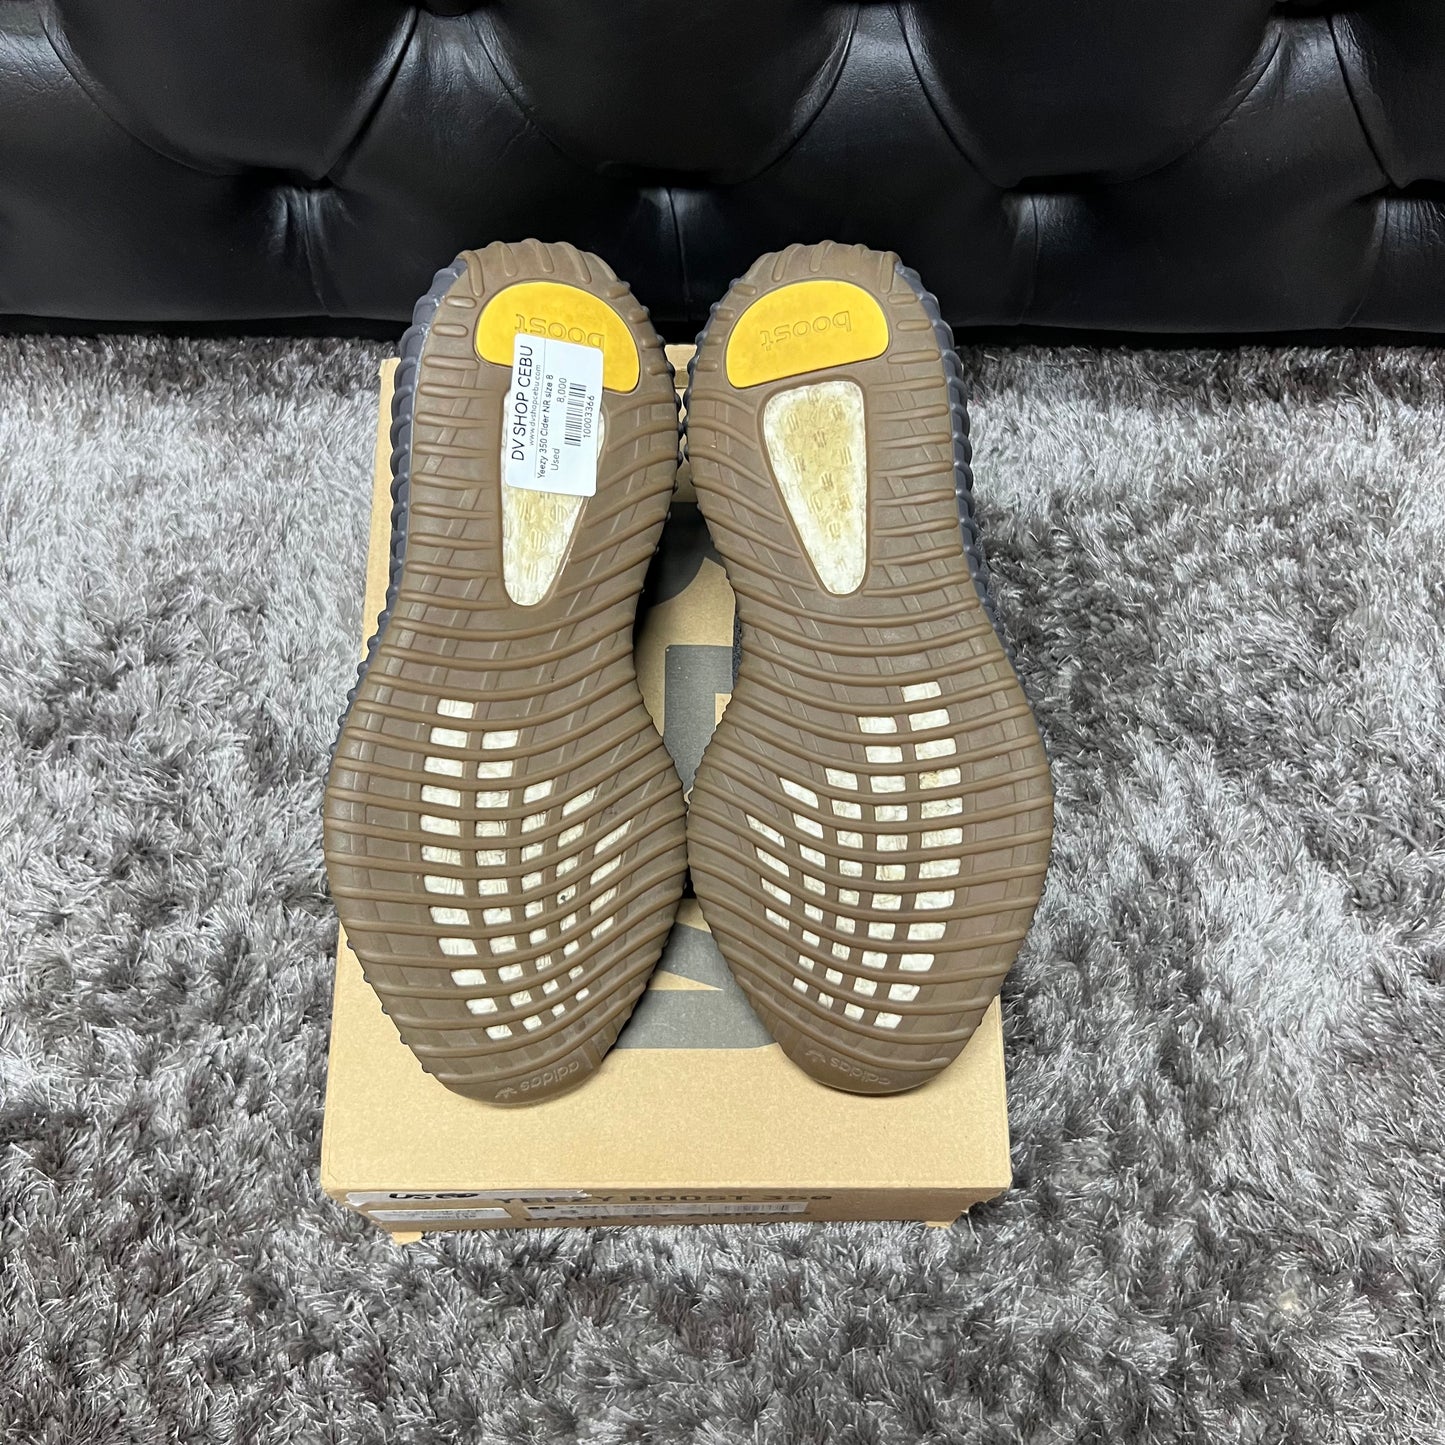 Yeezy 350 Cider NR size 8 used